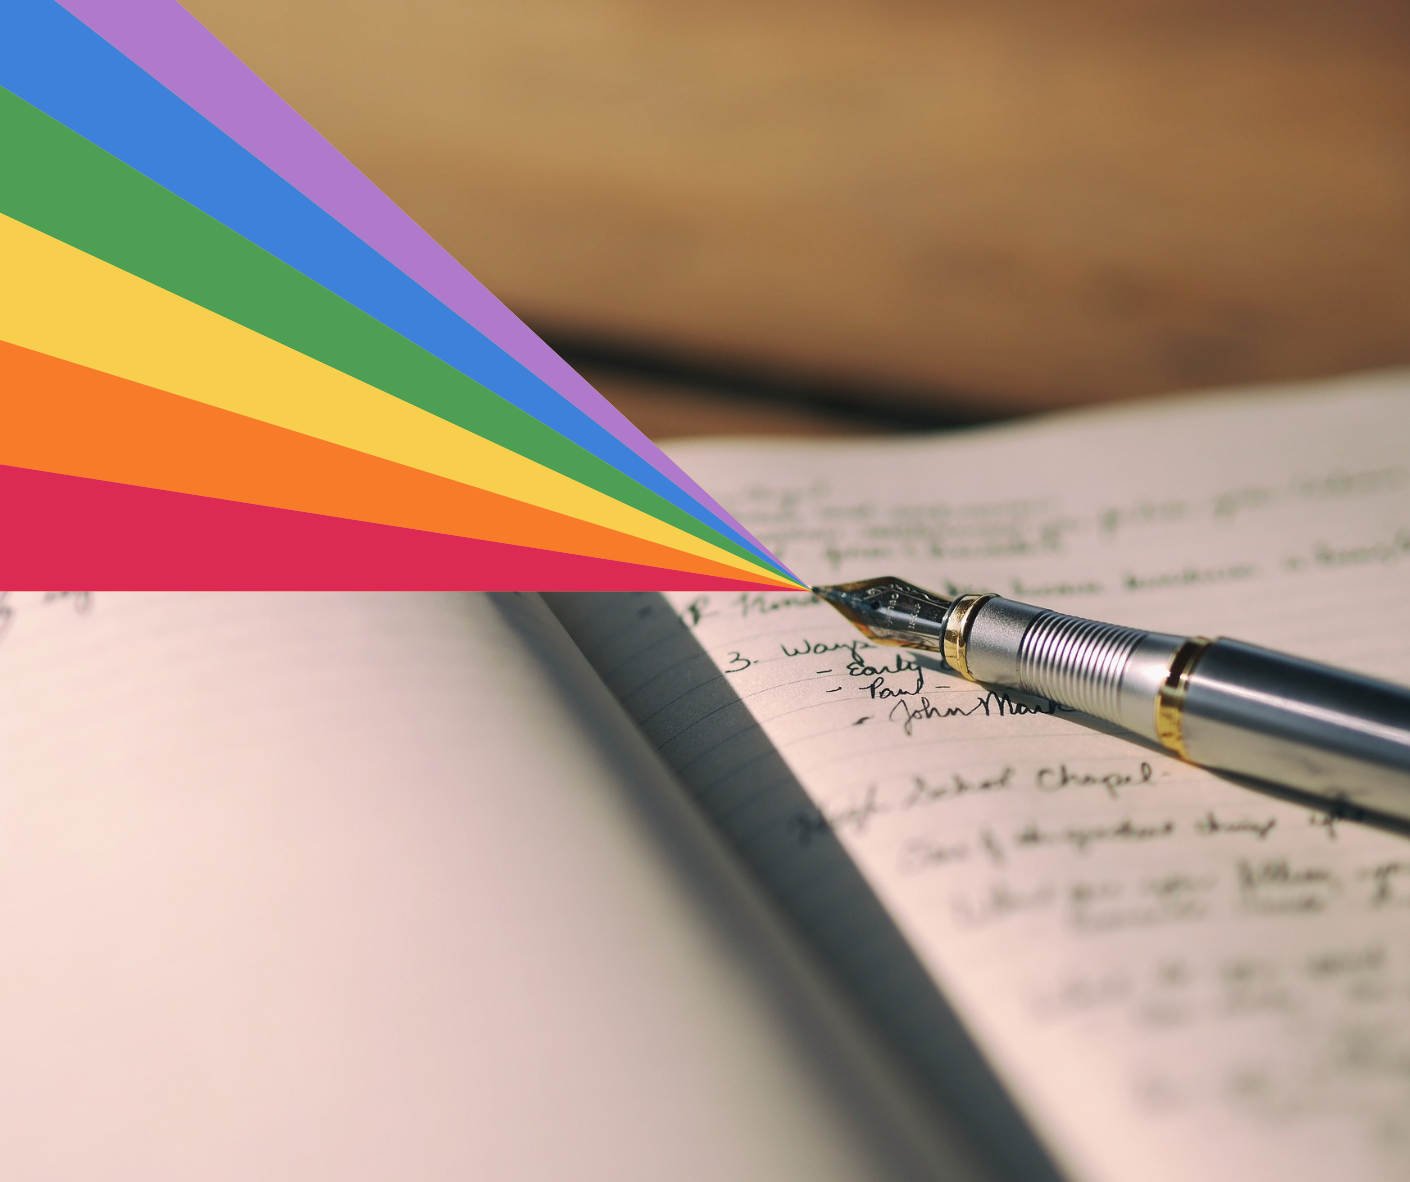 Pen laying on an open book with a rainbow coming from its tip